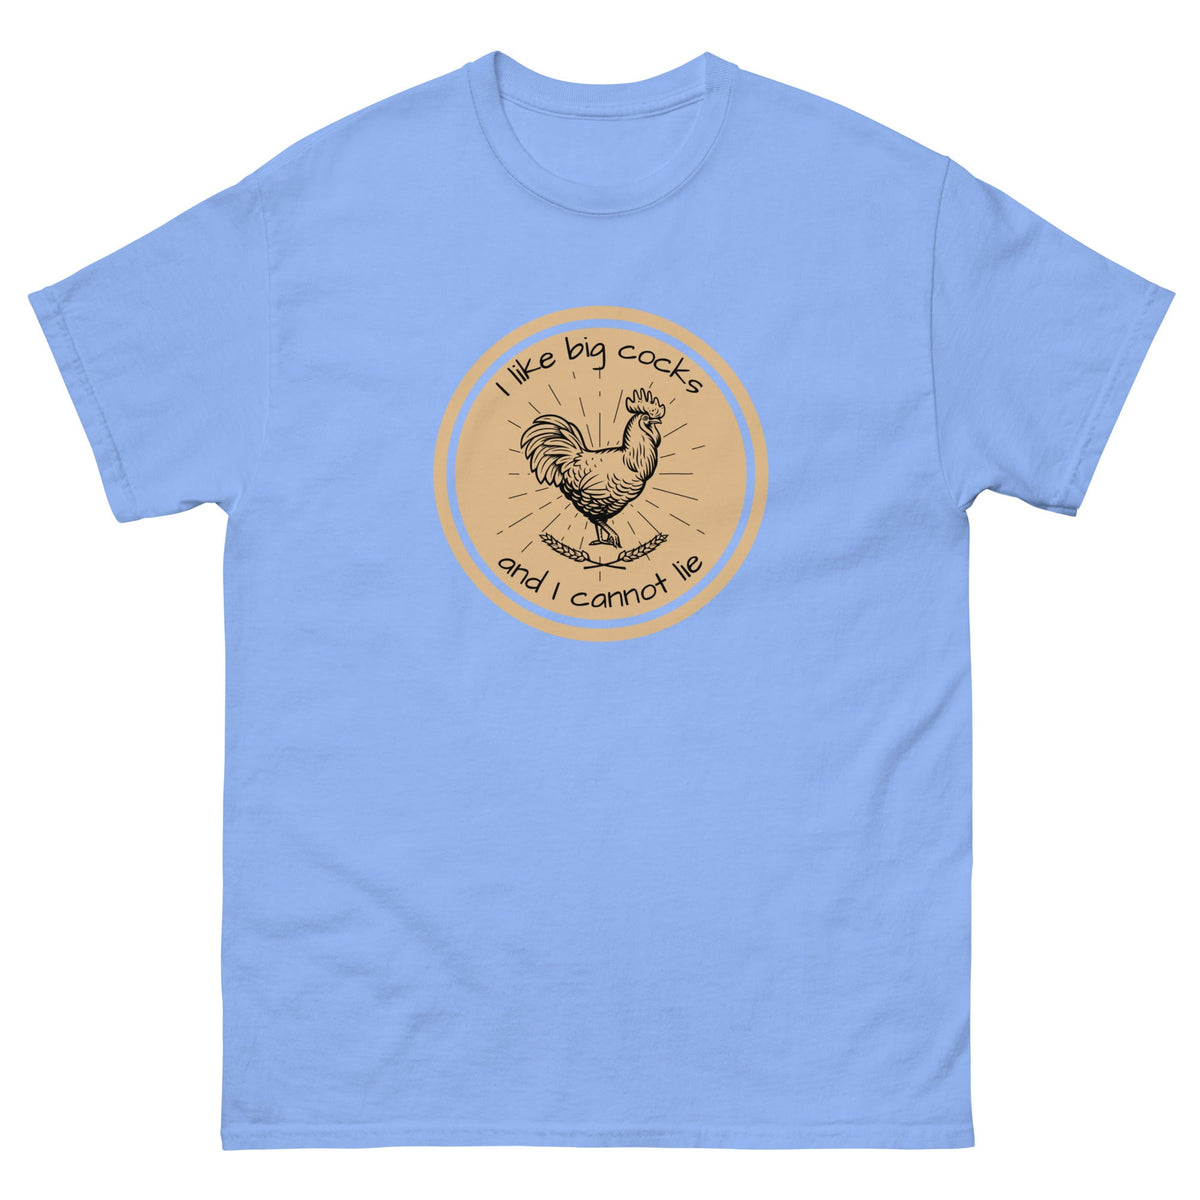 Chicken Big Cocks Unisex Classic Tee - Cluck It All Farms